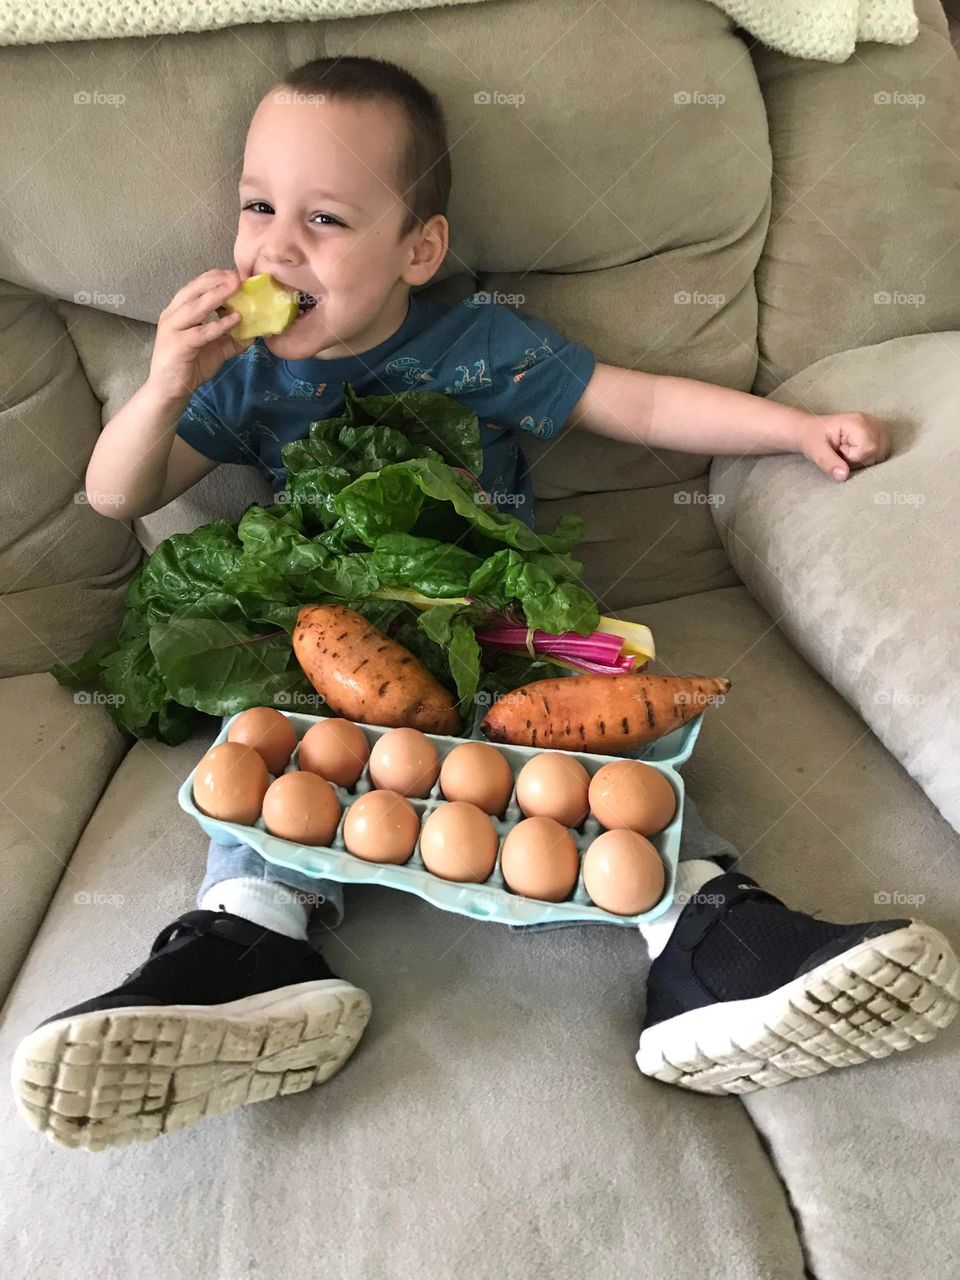 Child with eggs and vegetables after a trip to the farmers market